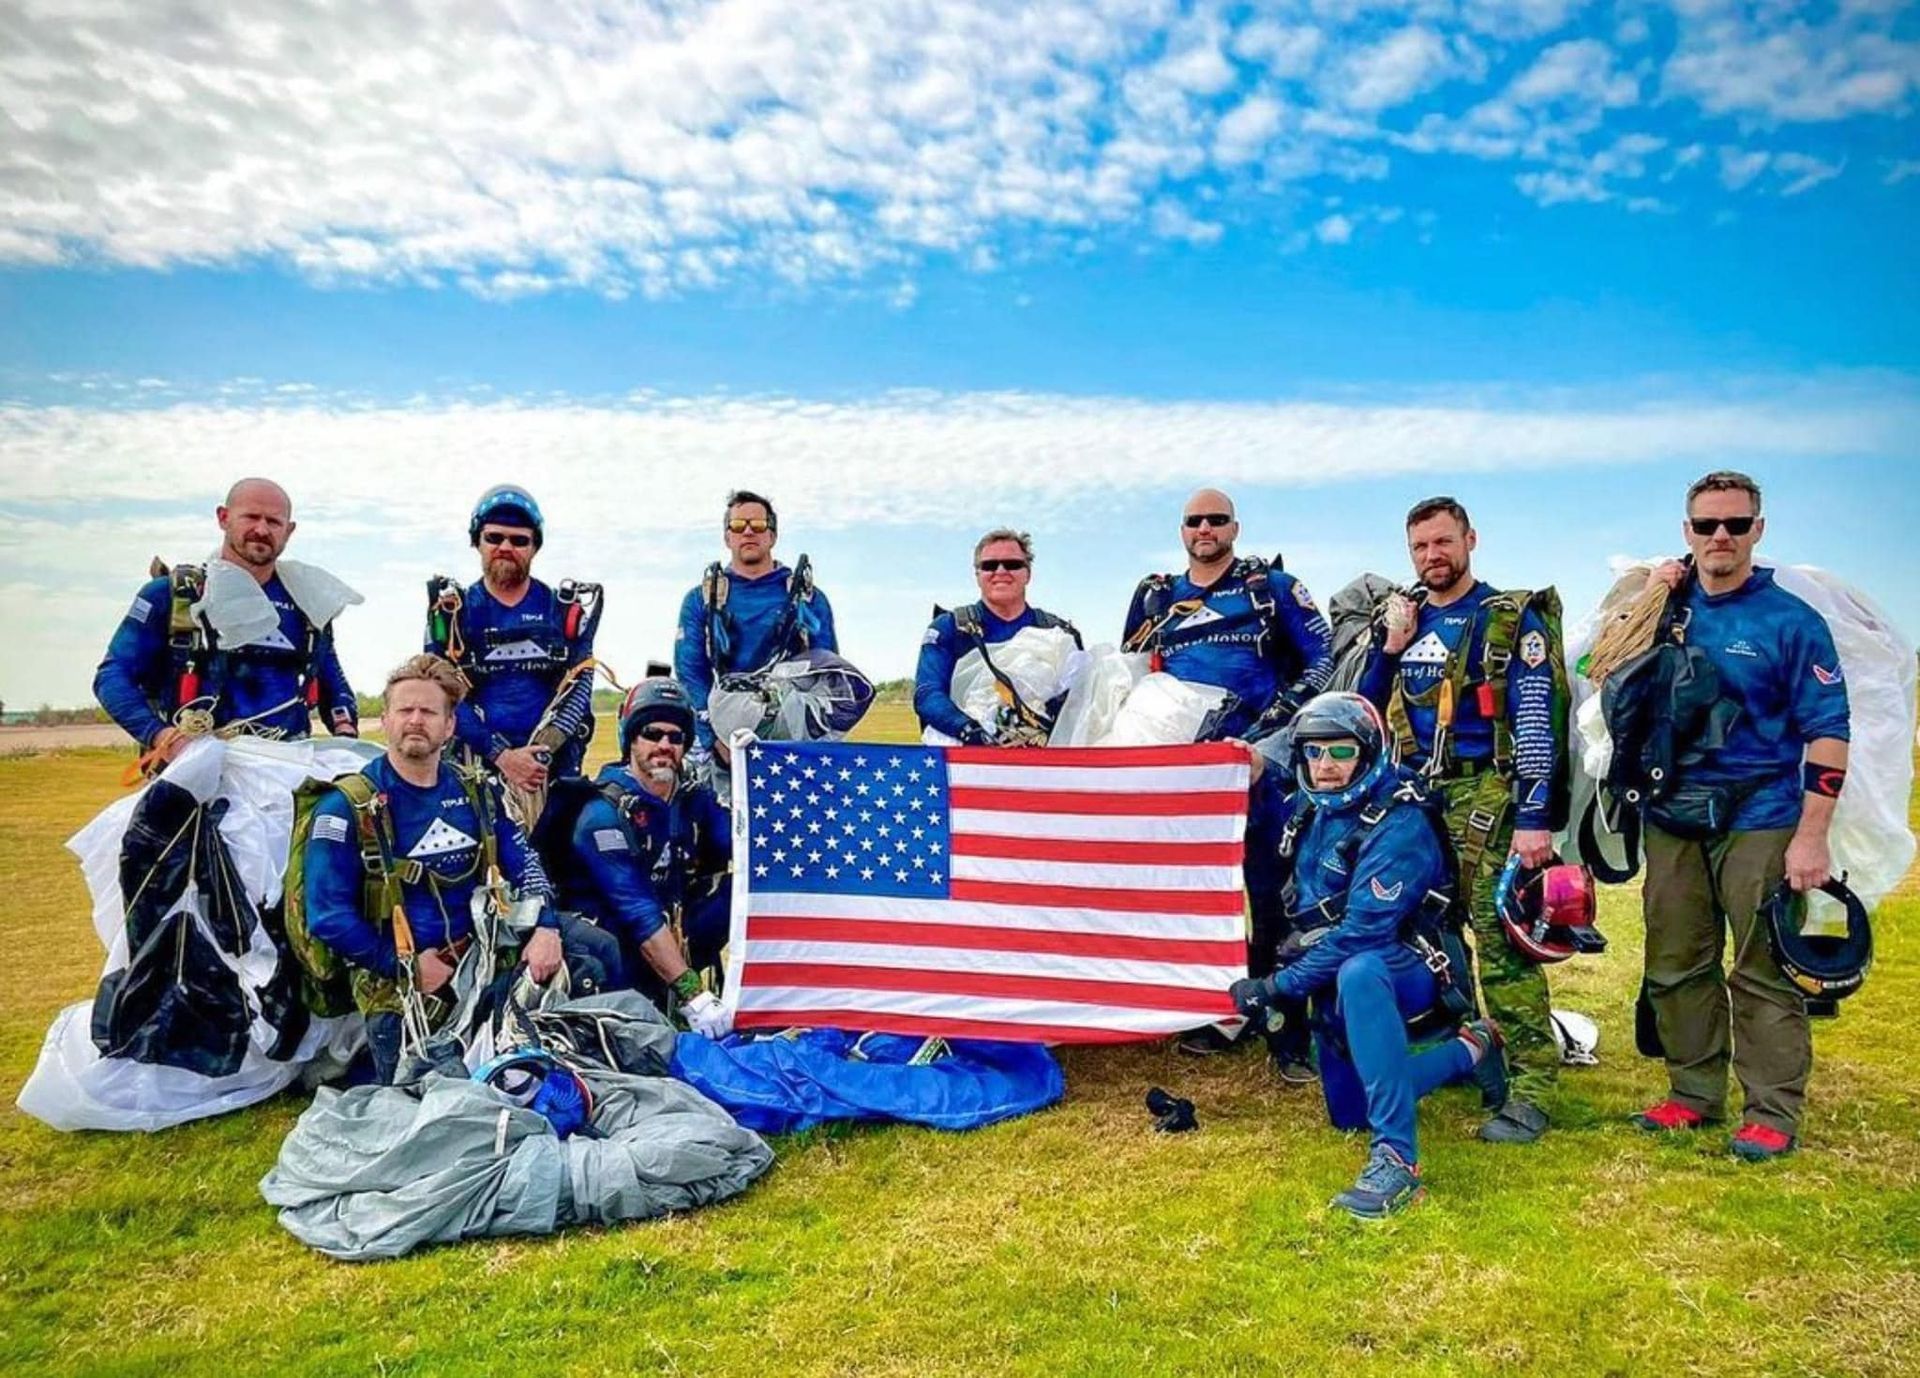 Fastest Time To Skydive Six Continents: Legacy Expeditions Skydiving Team sets world record